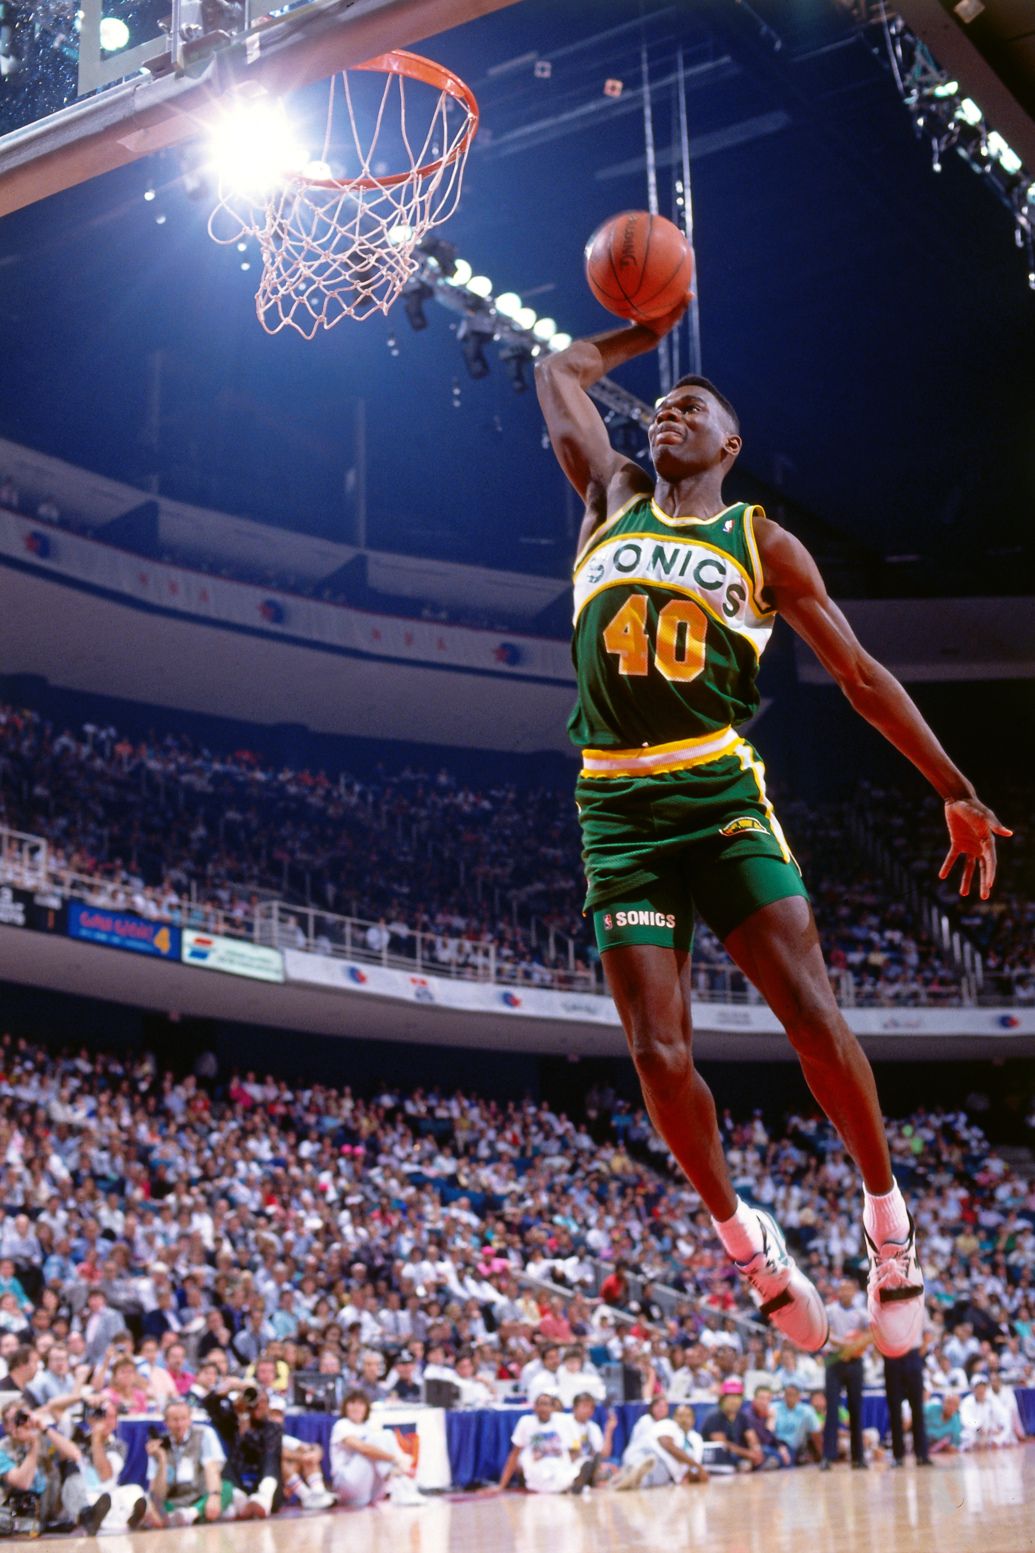 Shawn Kemp soars for the dunk